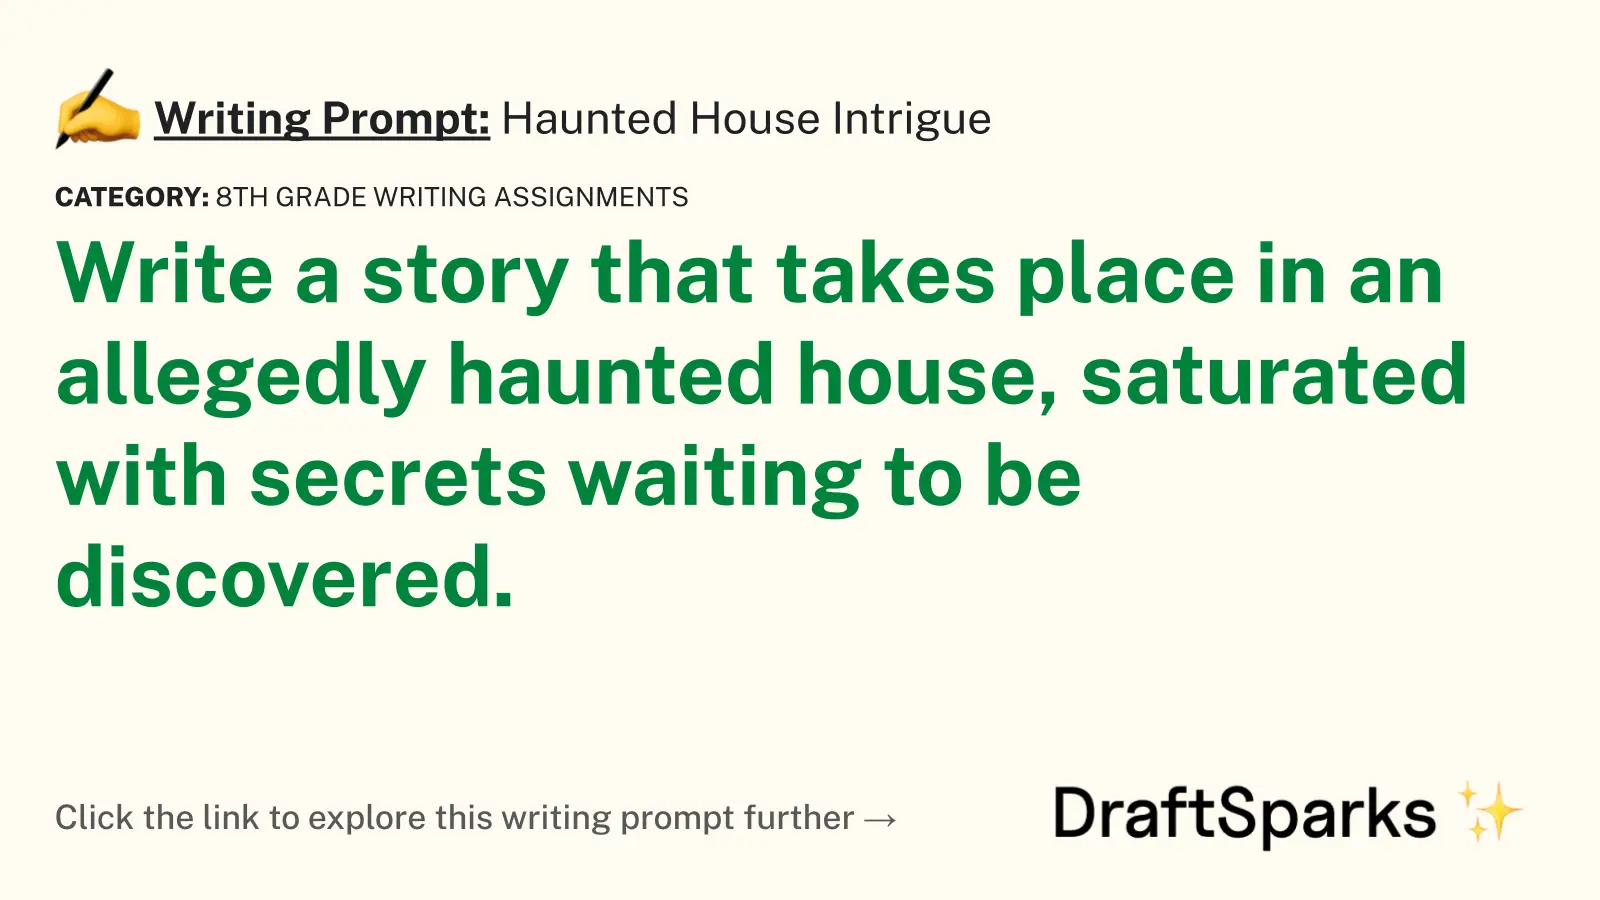 Haunted House Intrigue